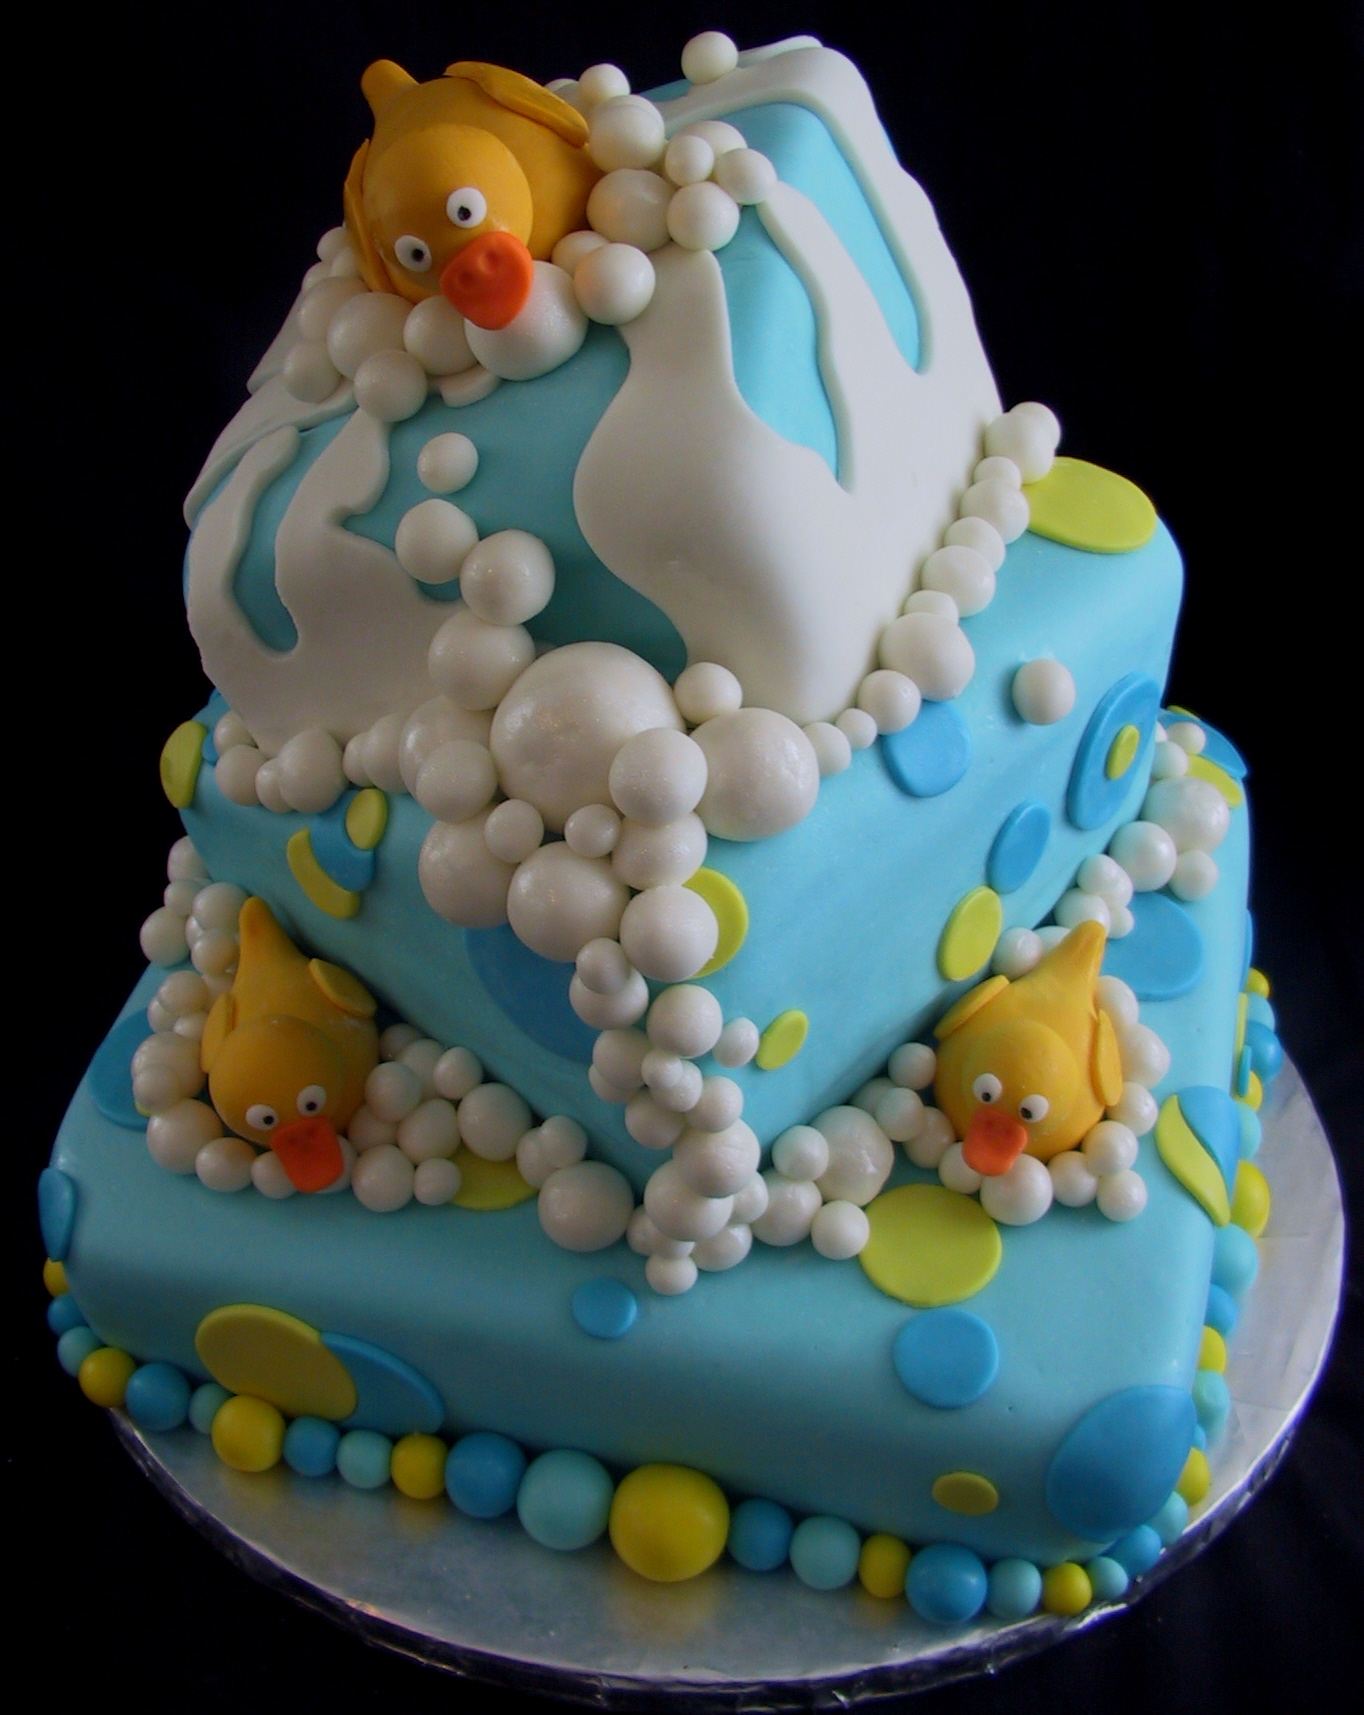 To order a cake call The Twisted Sifter Cake Shoppe at 859-285-0306 or ...